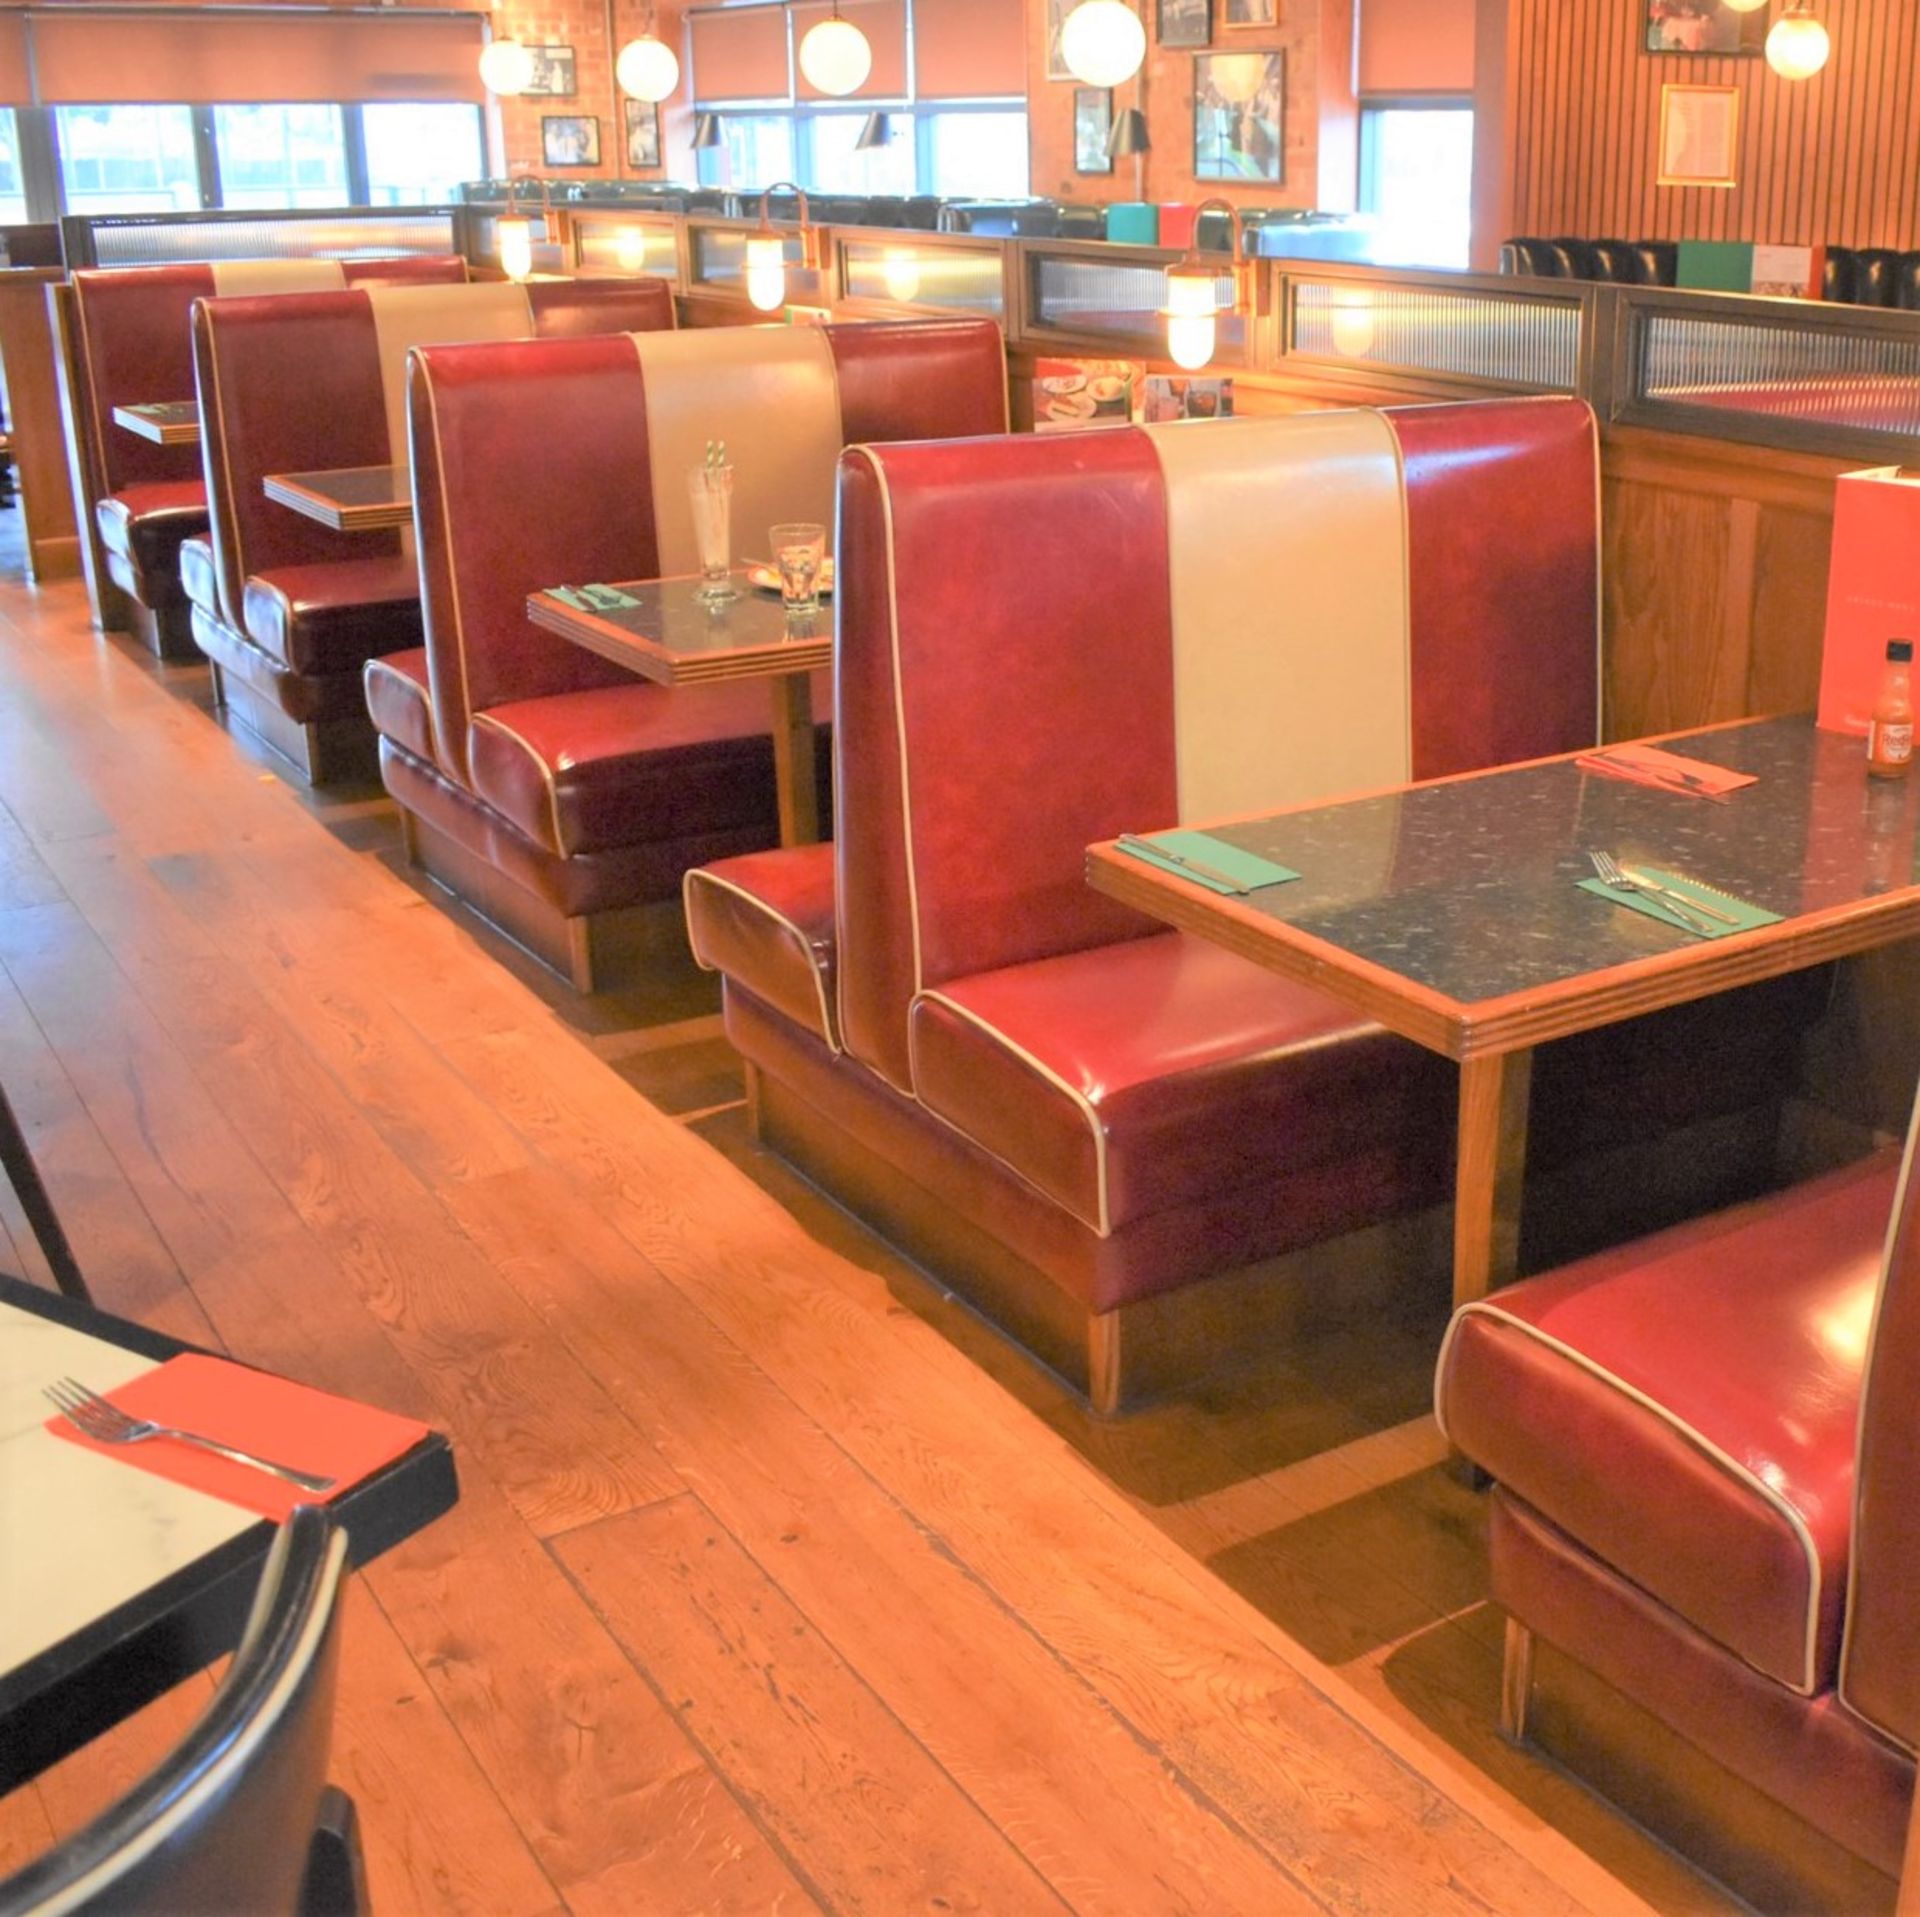 Collection of Retro 1950's Style American Diner Seating - Includes 5 x Double Back to Back